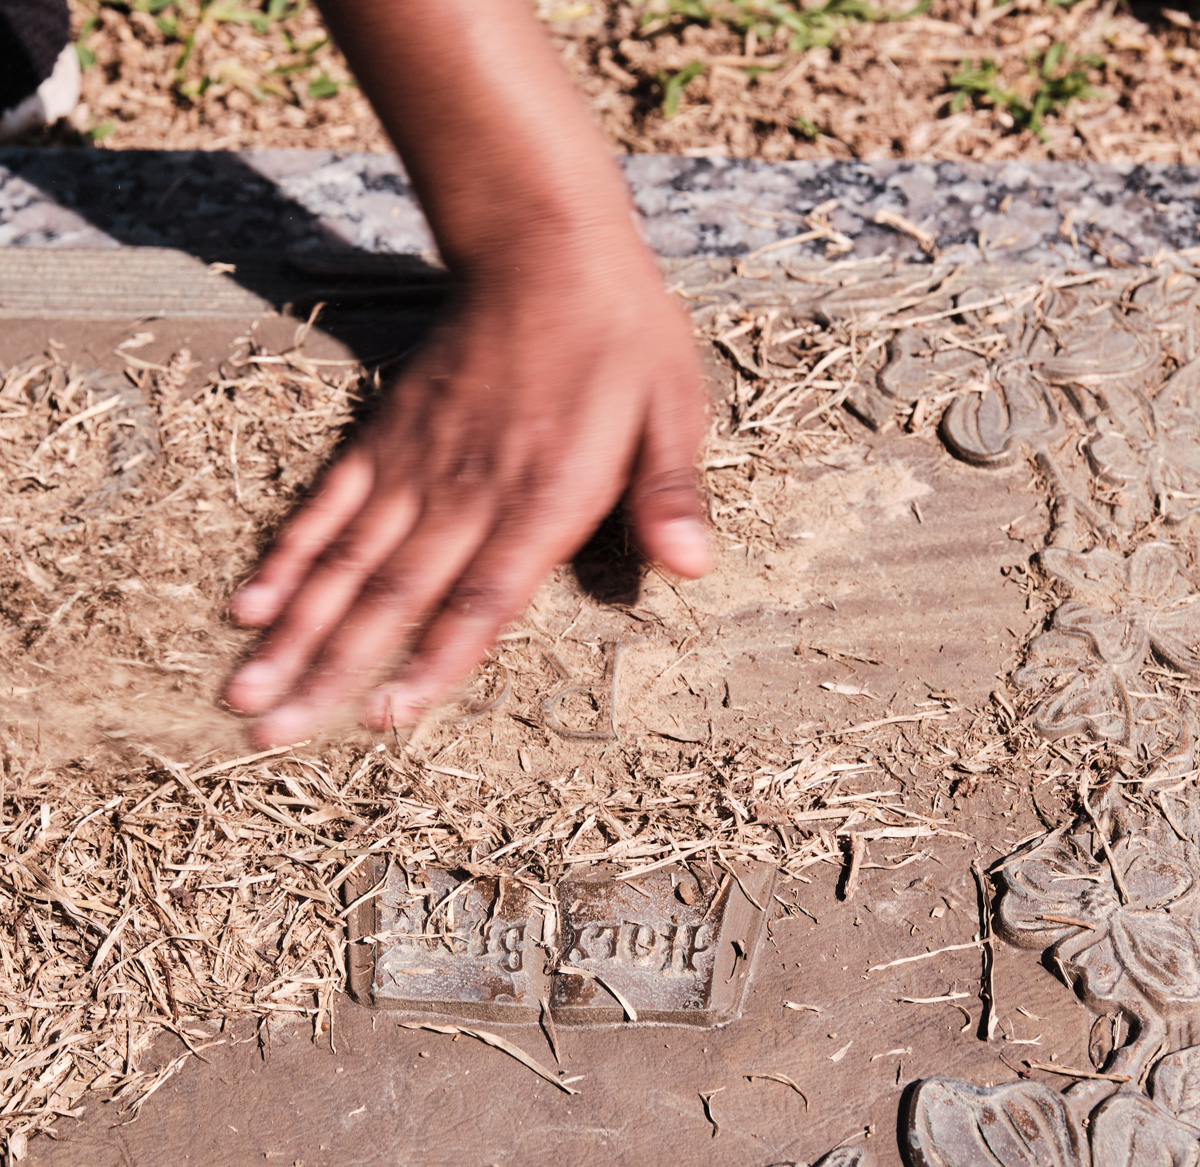 A hand is wiping grass and soil away from a grave marker with Holy Bible embossed